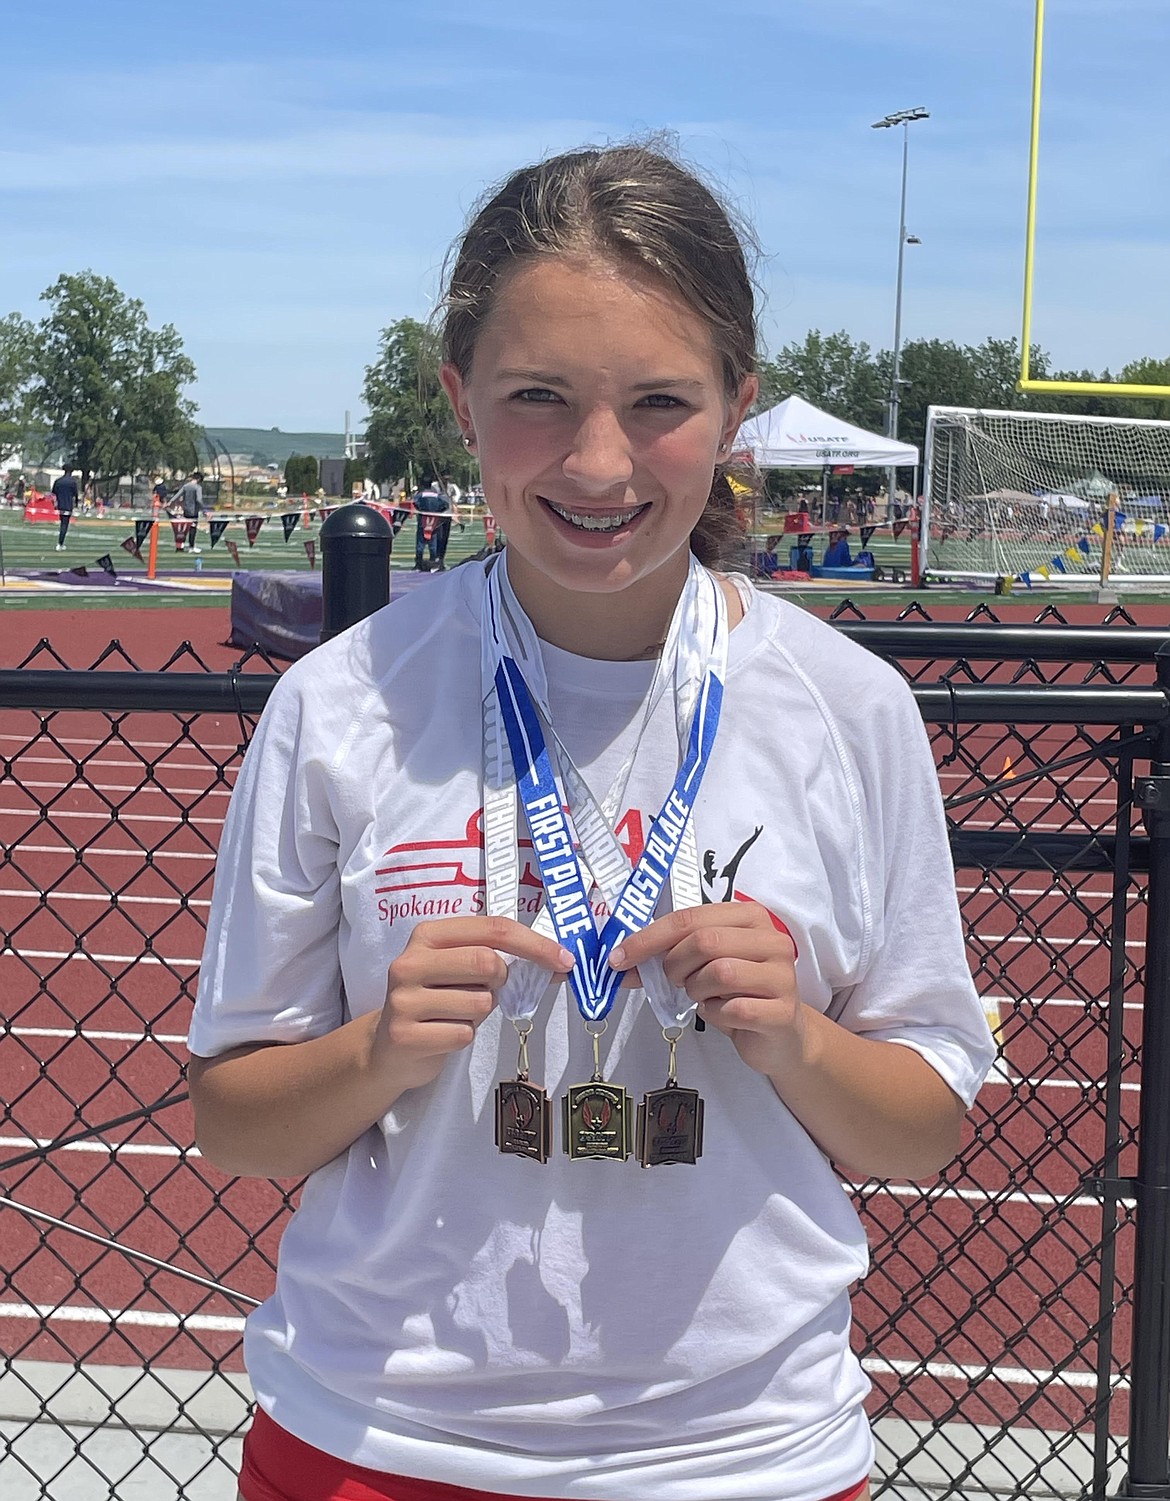 Moses Lake’s Paige Perkins will be competing at the 2022 USATF National Junior Olympic Track and Field Championships in Sacramento, California later this month.